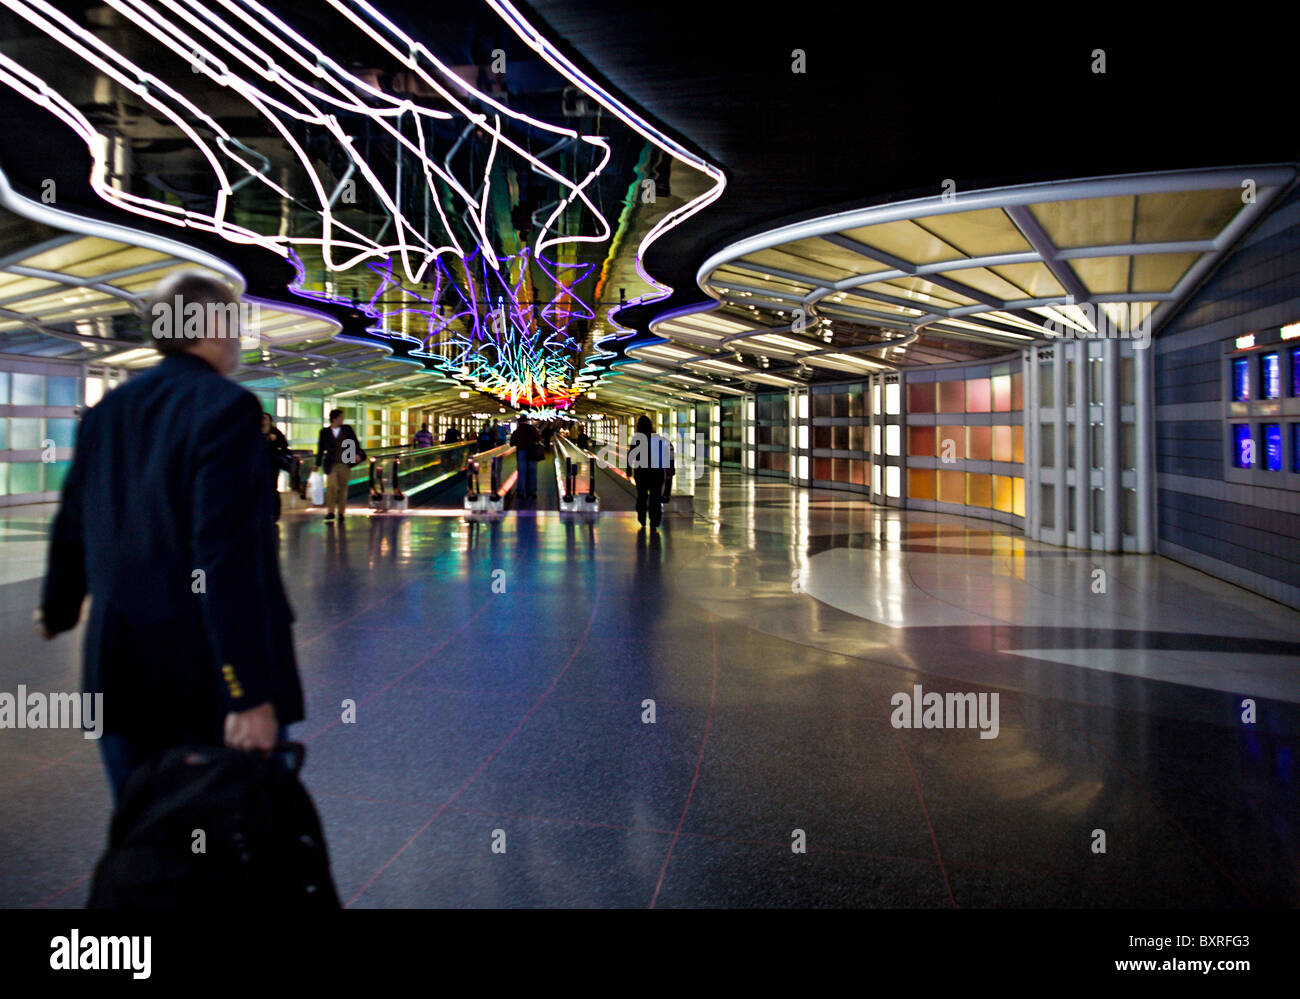 CHICAGO, ILLINOIS: Busy travelers on a moving sidewalk illuminated by colored neon lights in the underground tunnel Stock Photo